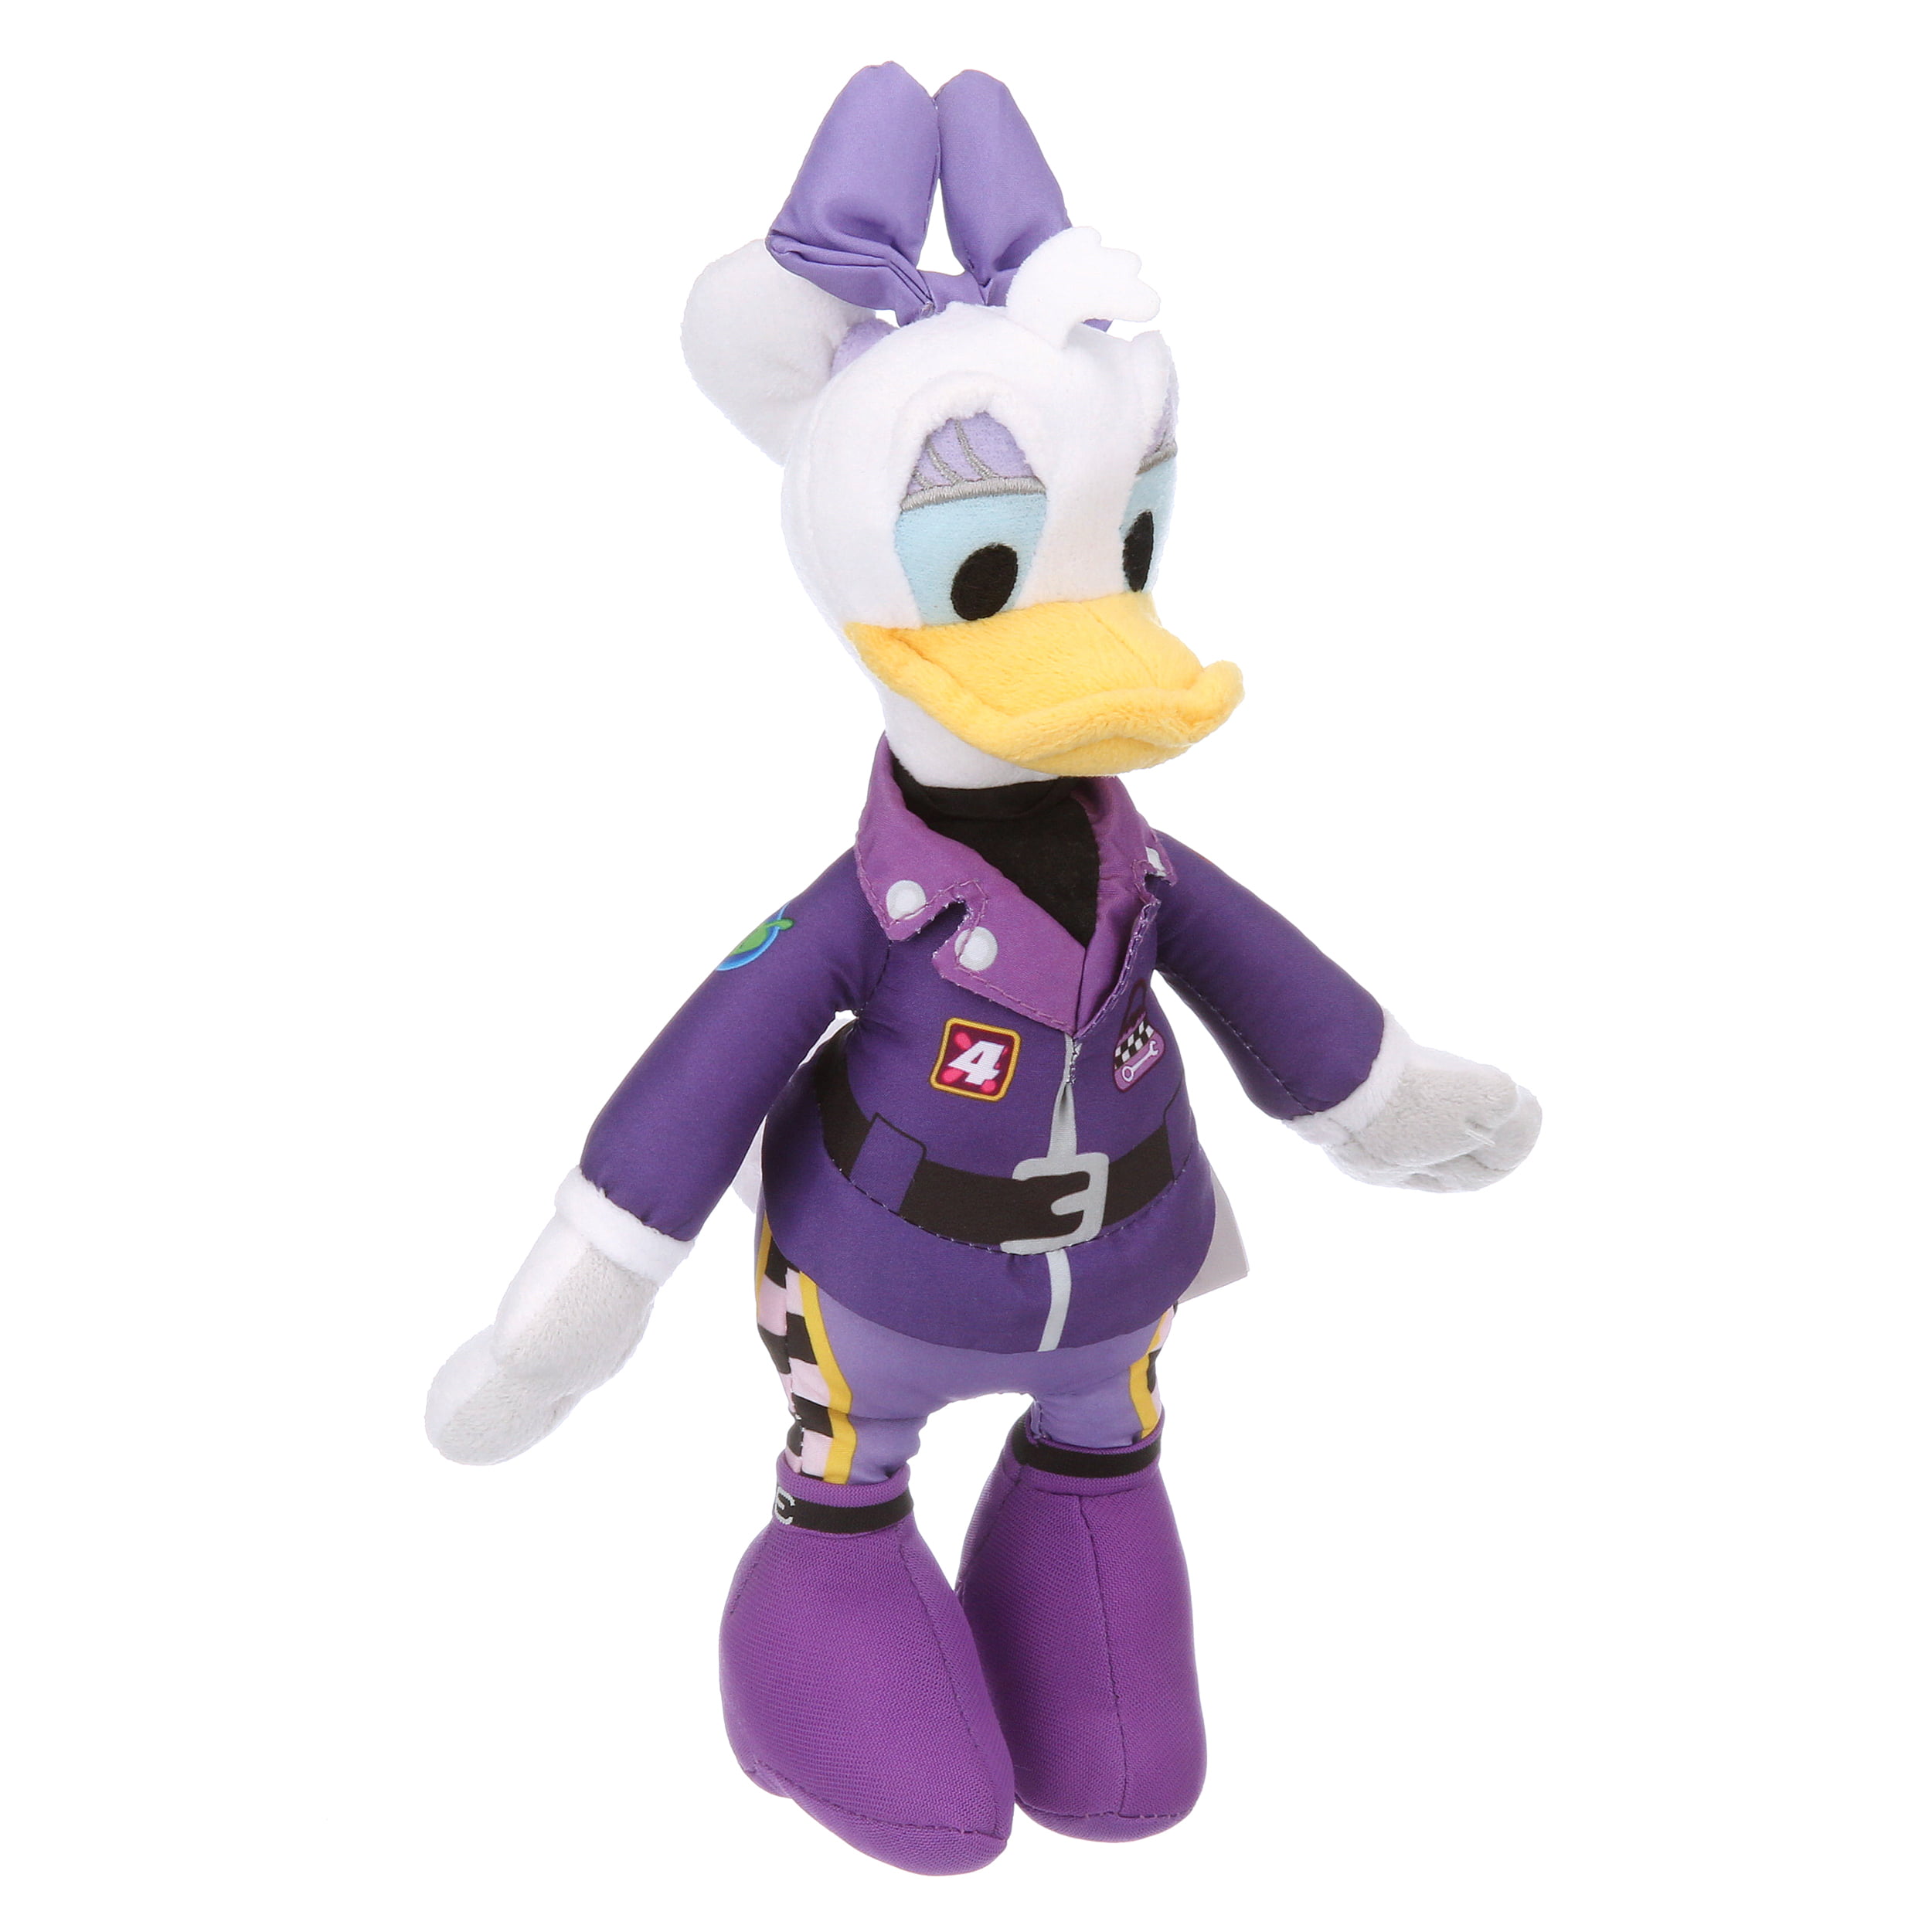 Disney Daisy Duck 9 1/2" Plush Doll Mickey and the Roadster Racers Series 